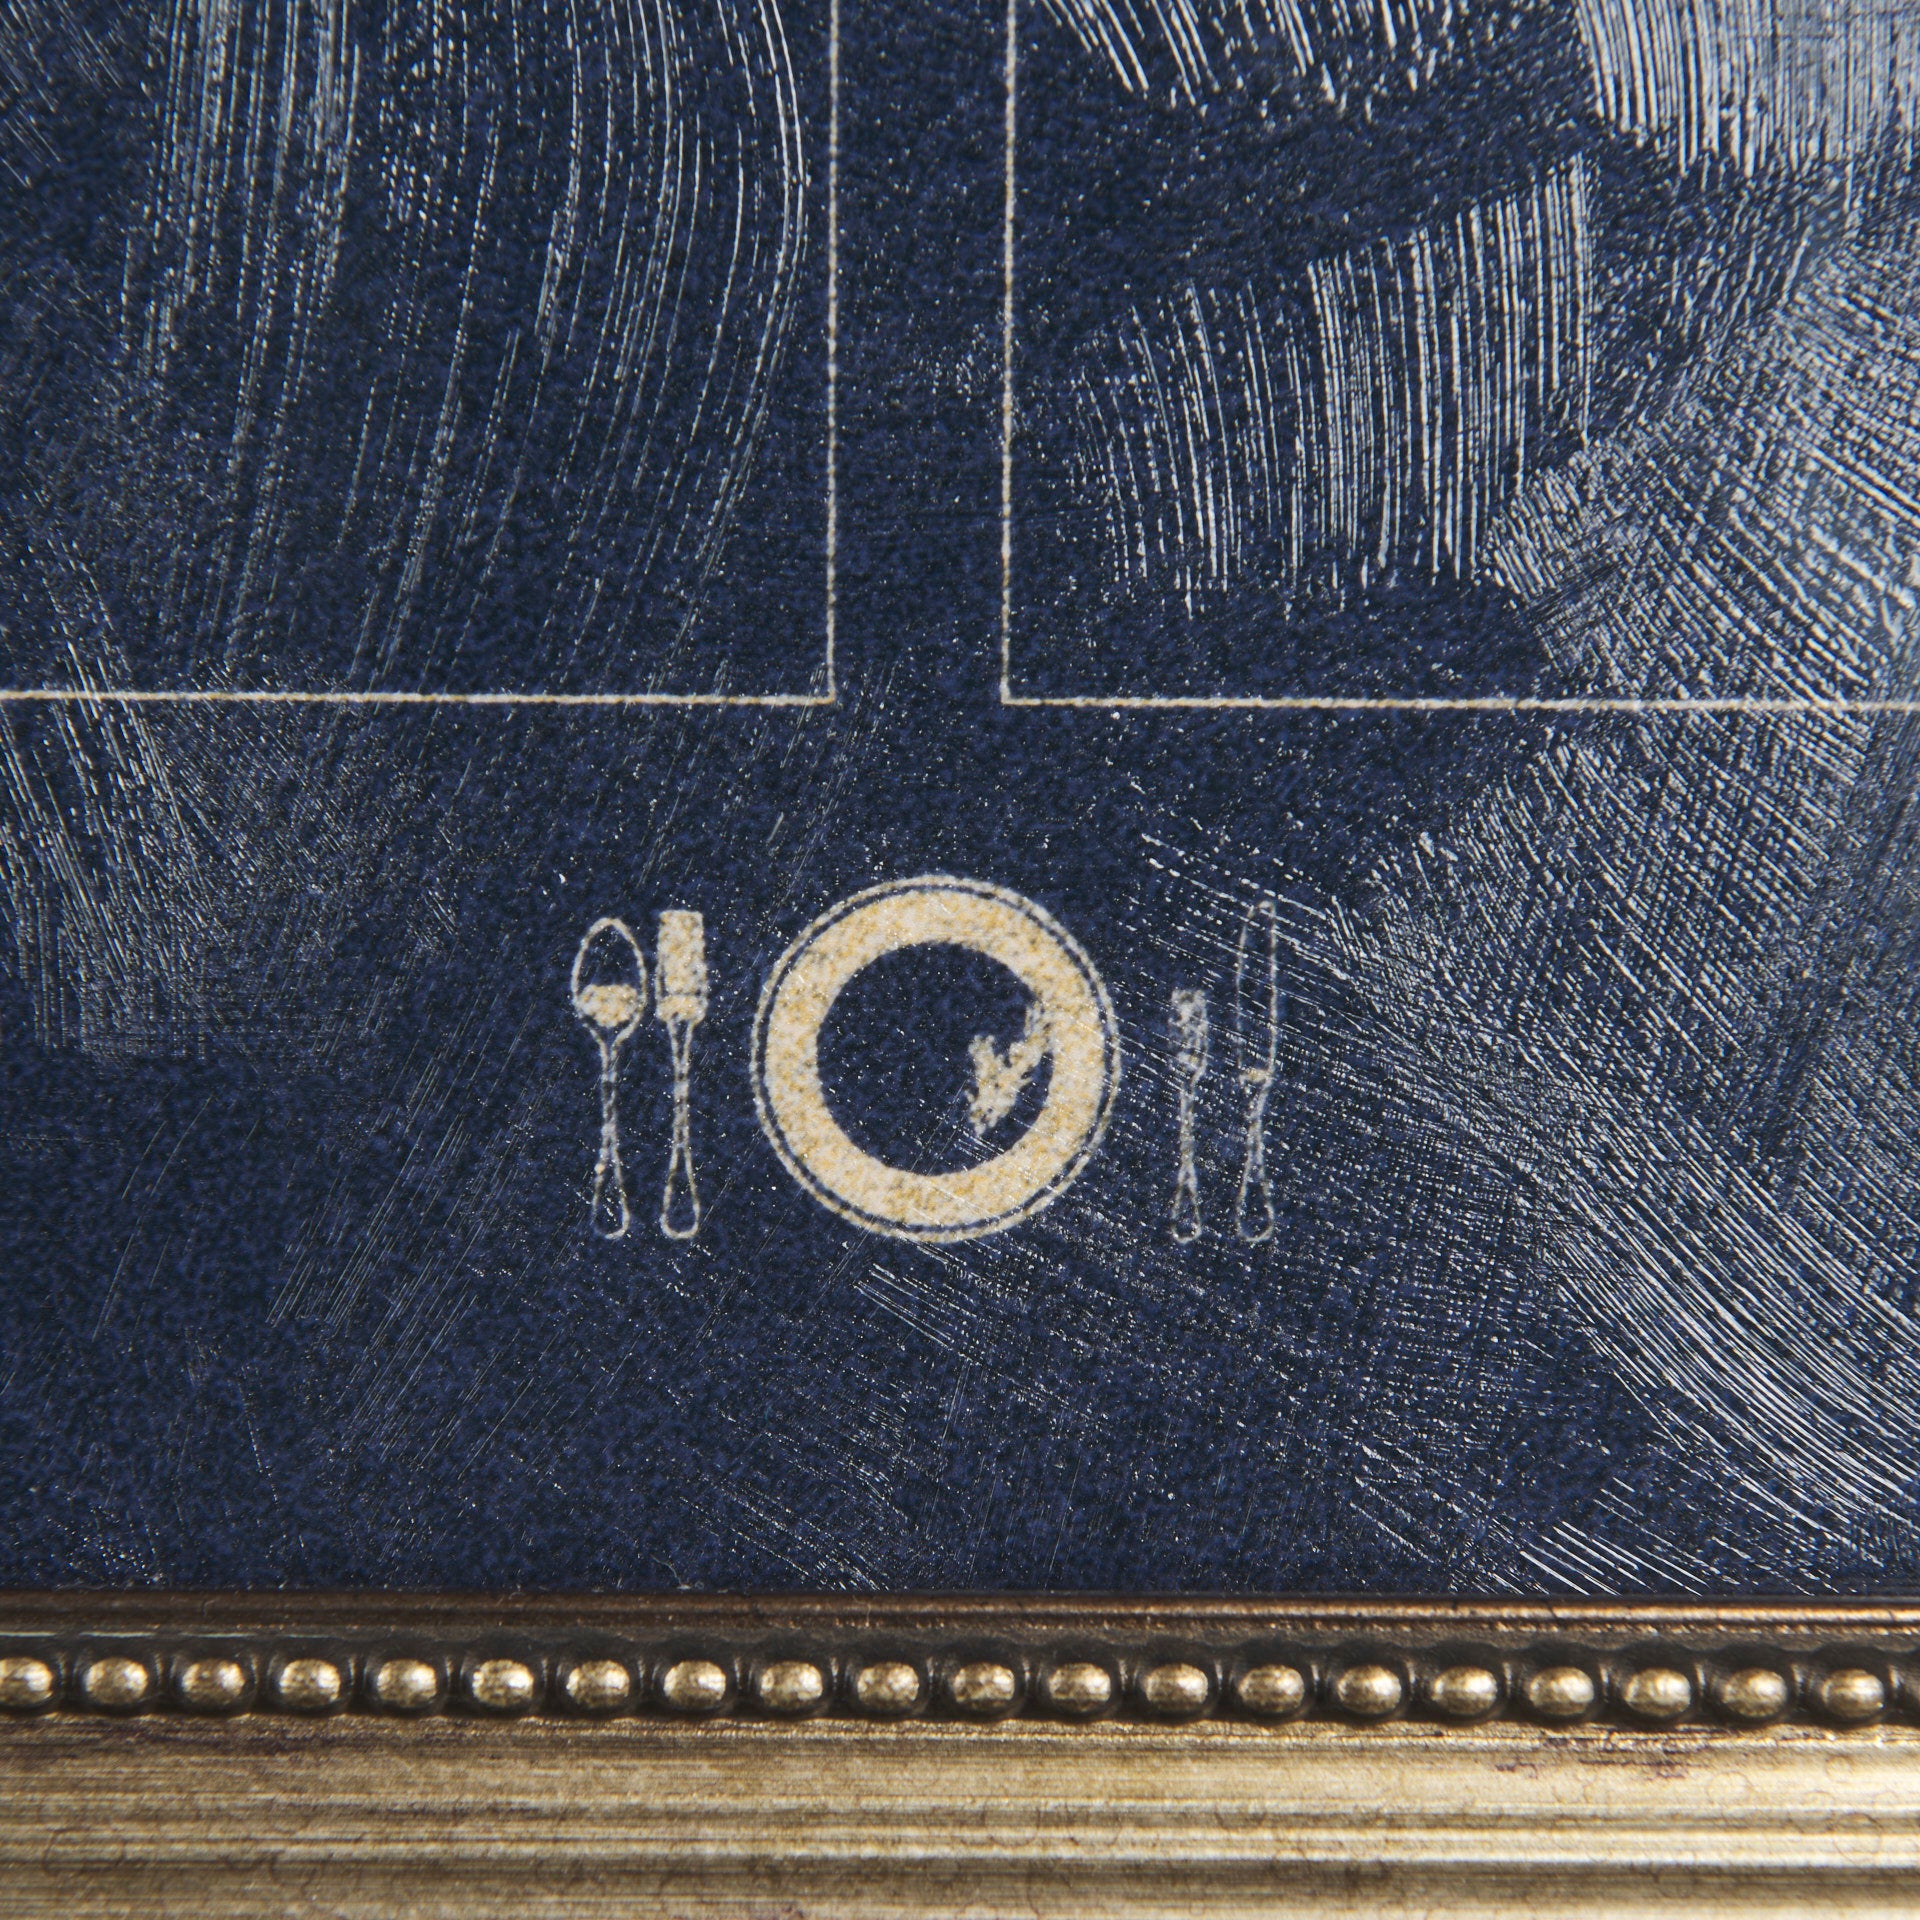 Close-up of a textured blue painting with marked white lines and a golden circular design featuring silhouette forks and a plate in the center, framed by an ornate golden border in a Mercana bungalow.